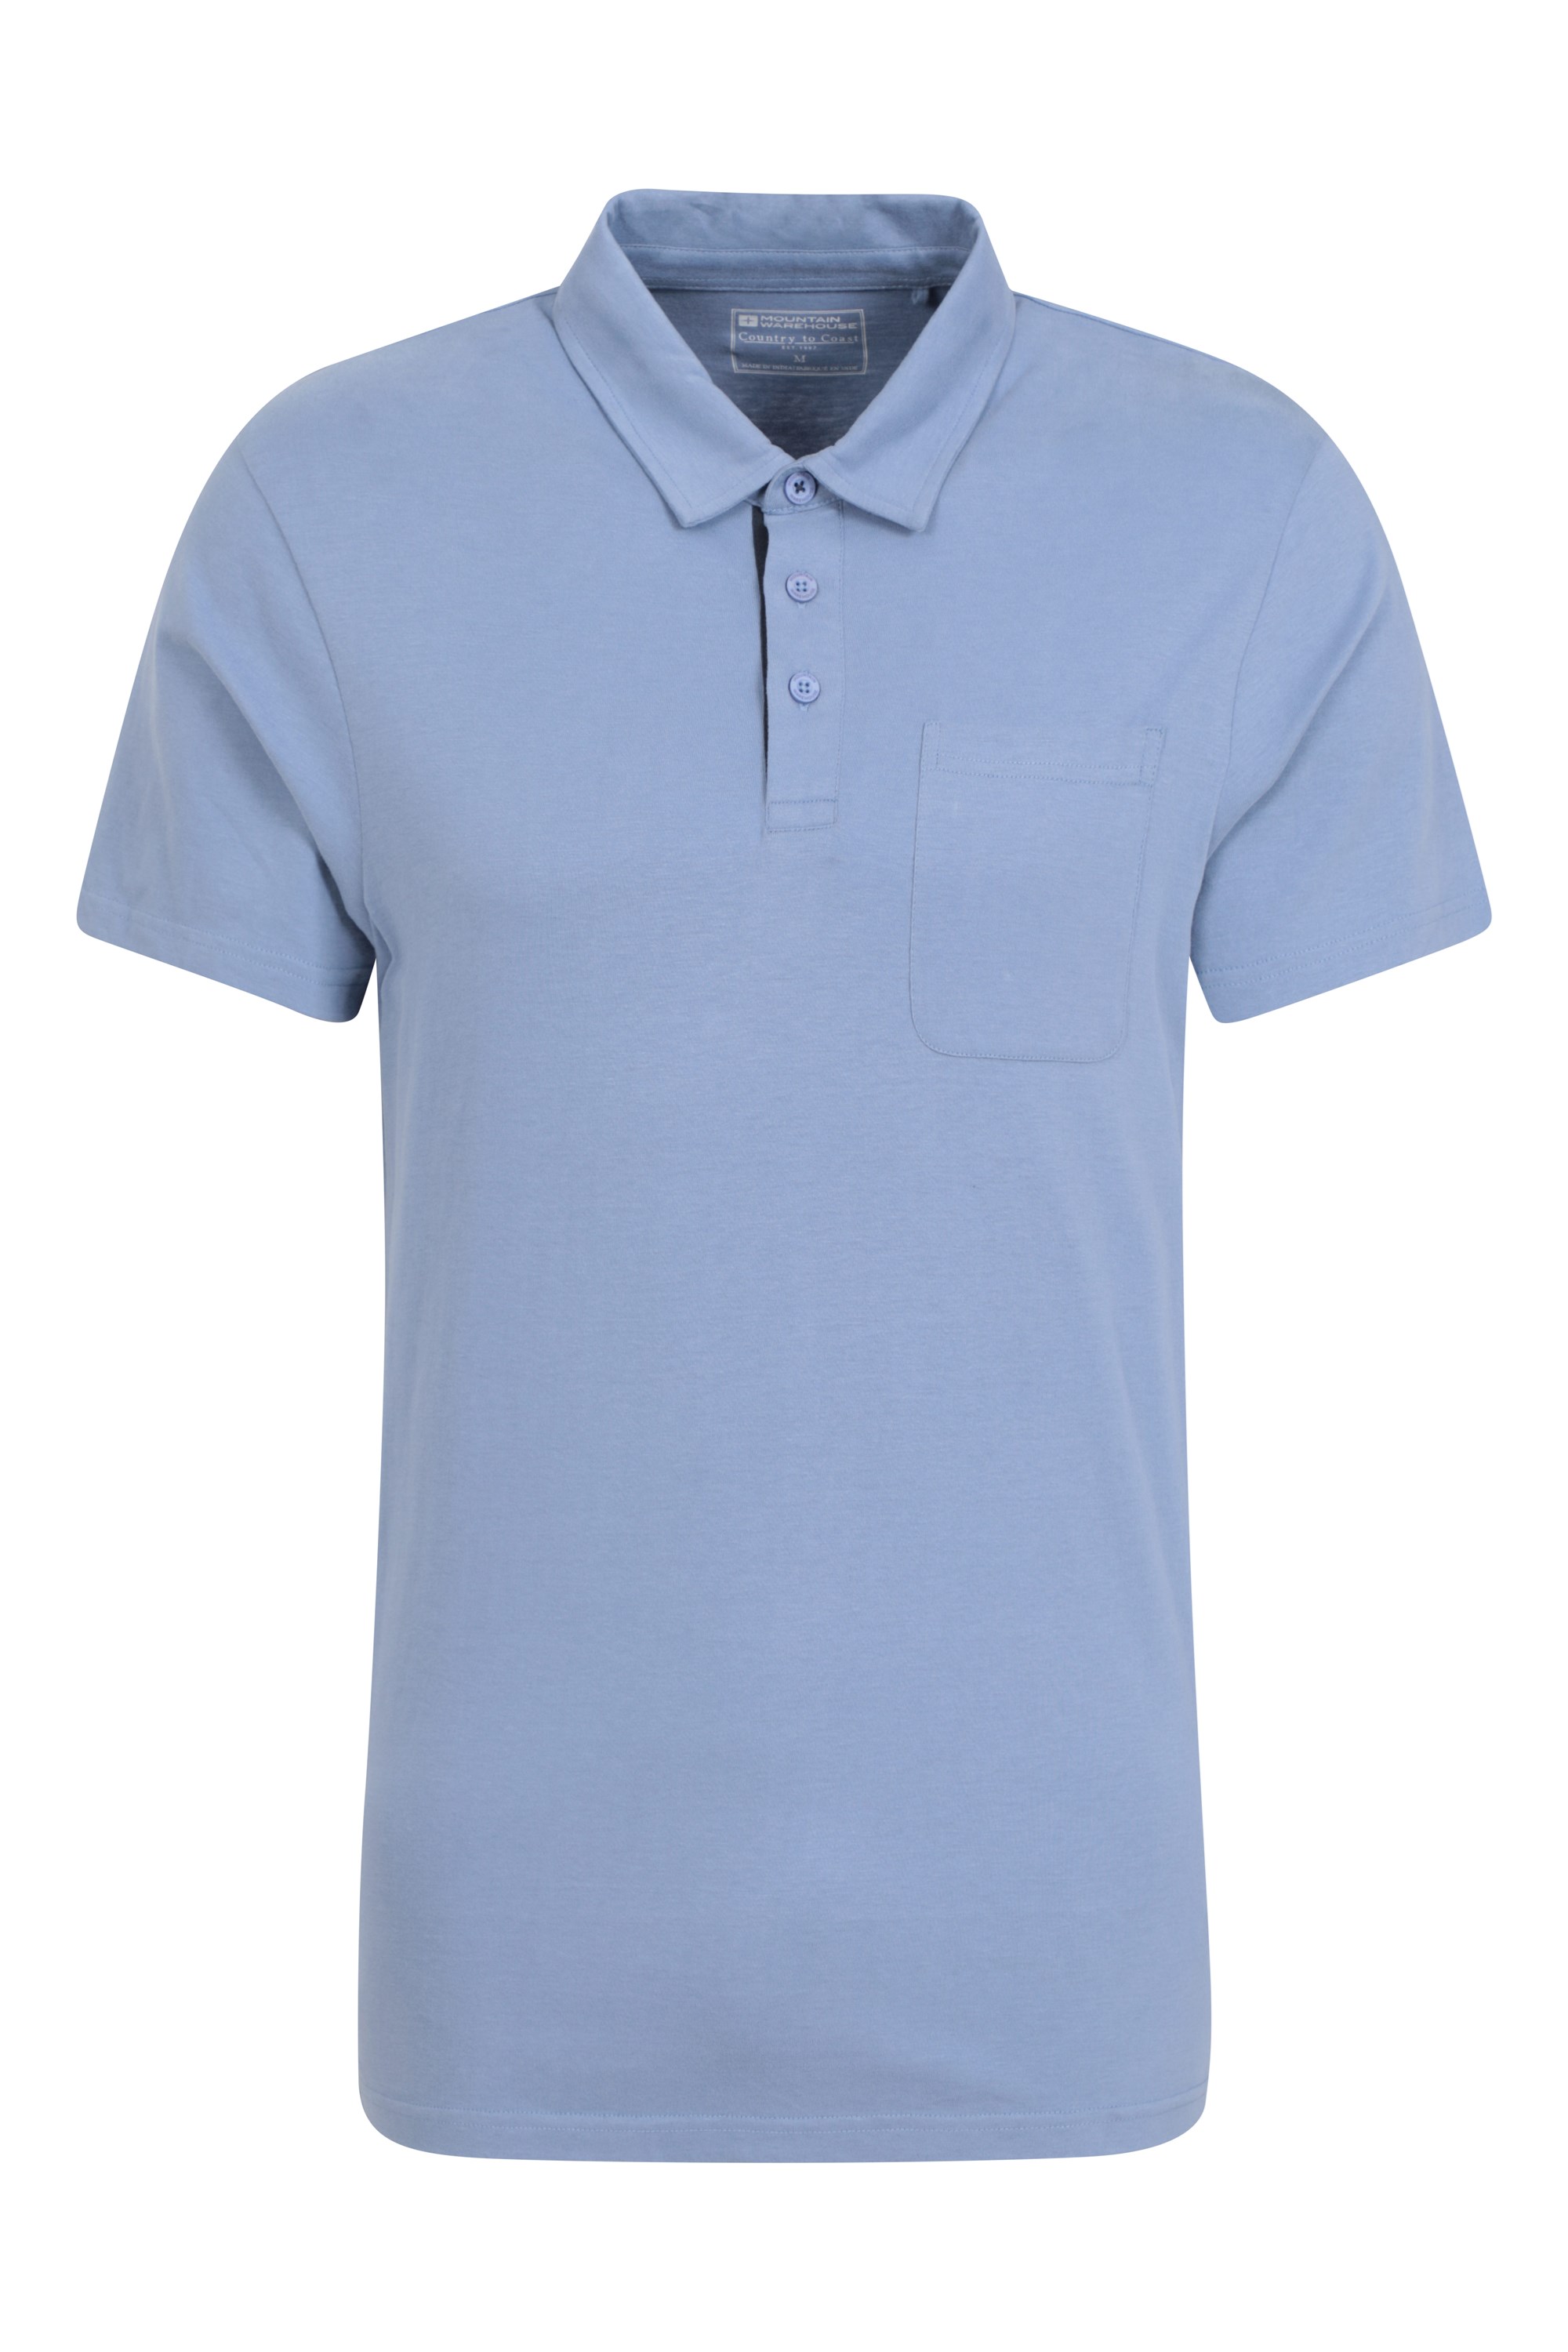 Mens Neale Supersoft Jersey Polo - Light Blue